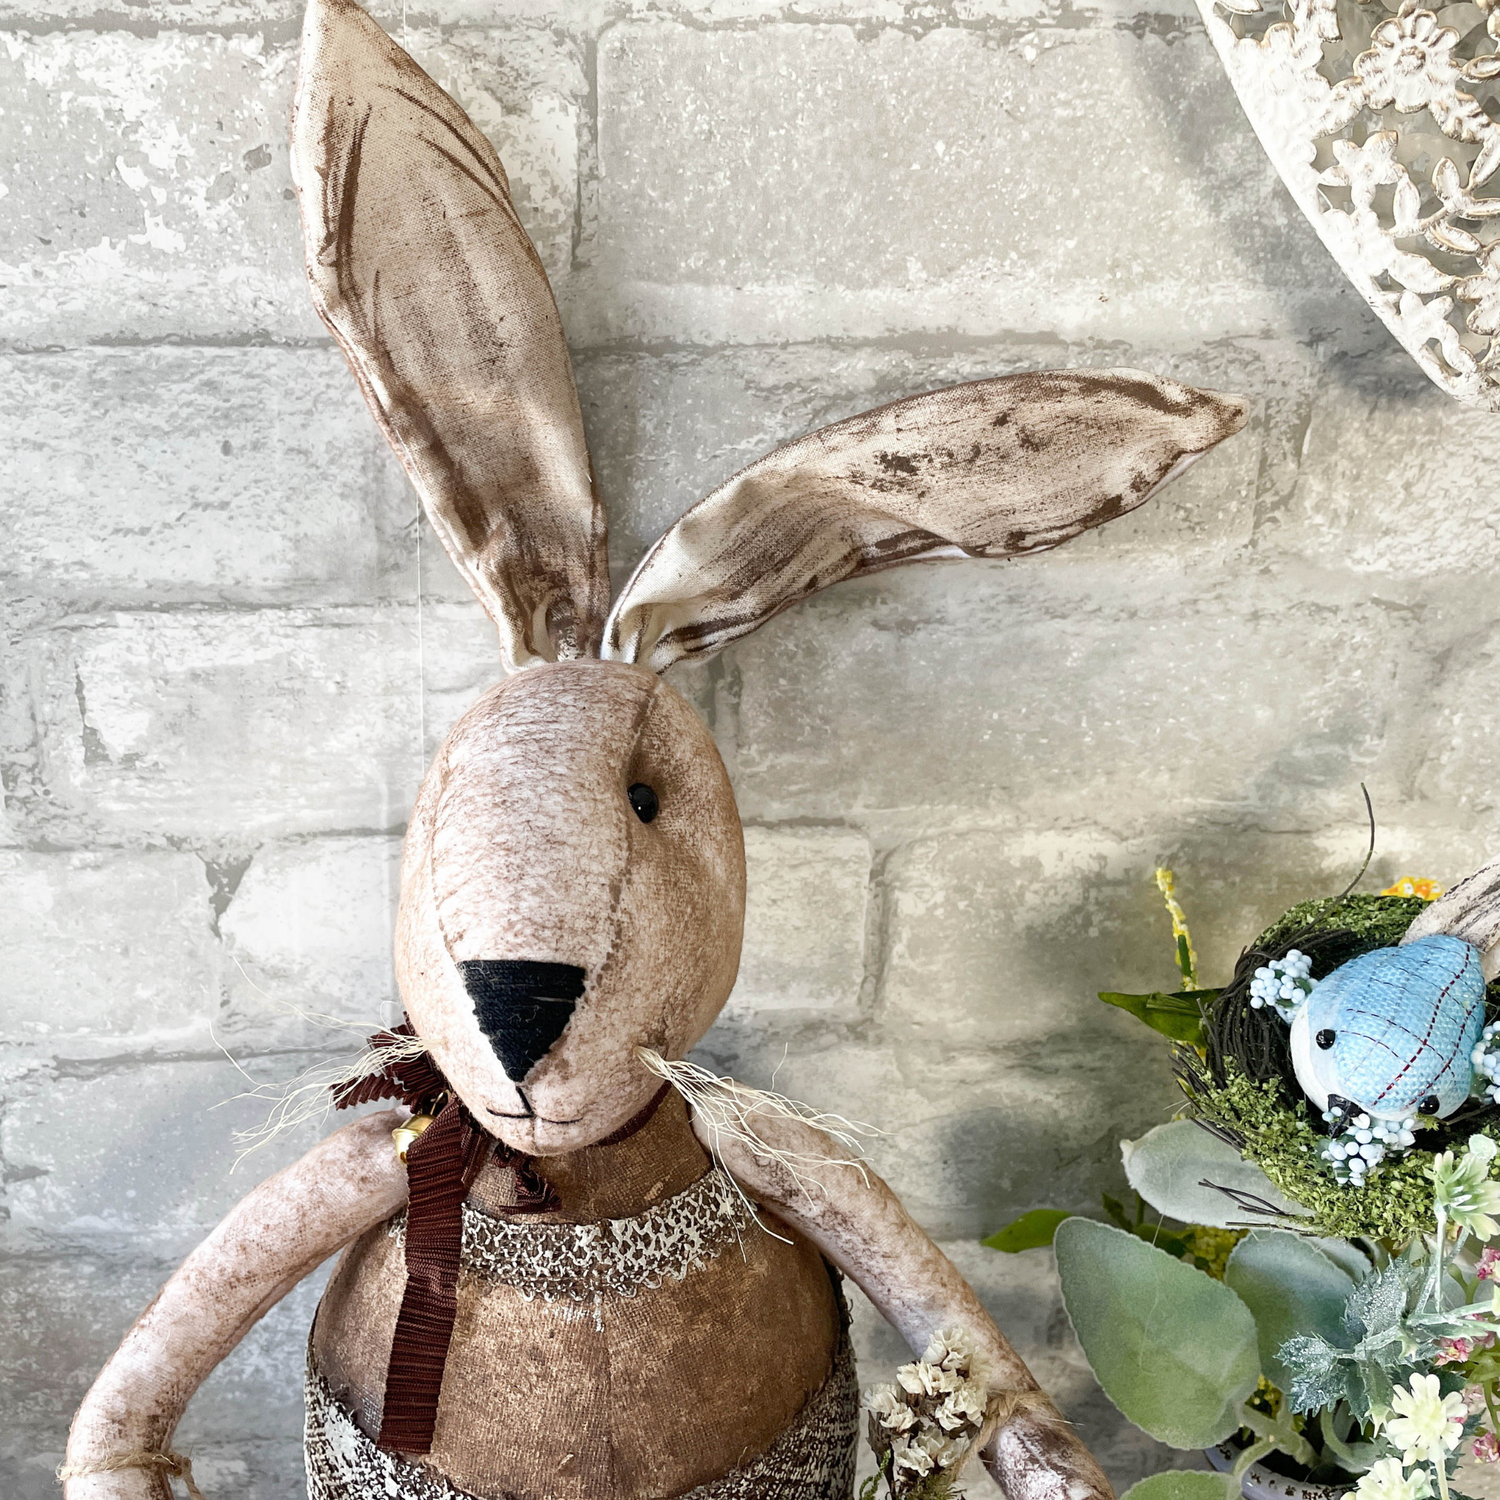 One of a Kind Handmade Bunny Doll / Handmade Cloth Doll / Spring and Easter Bunny Decoration